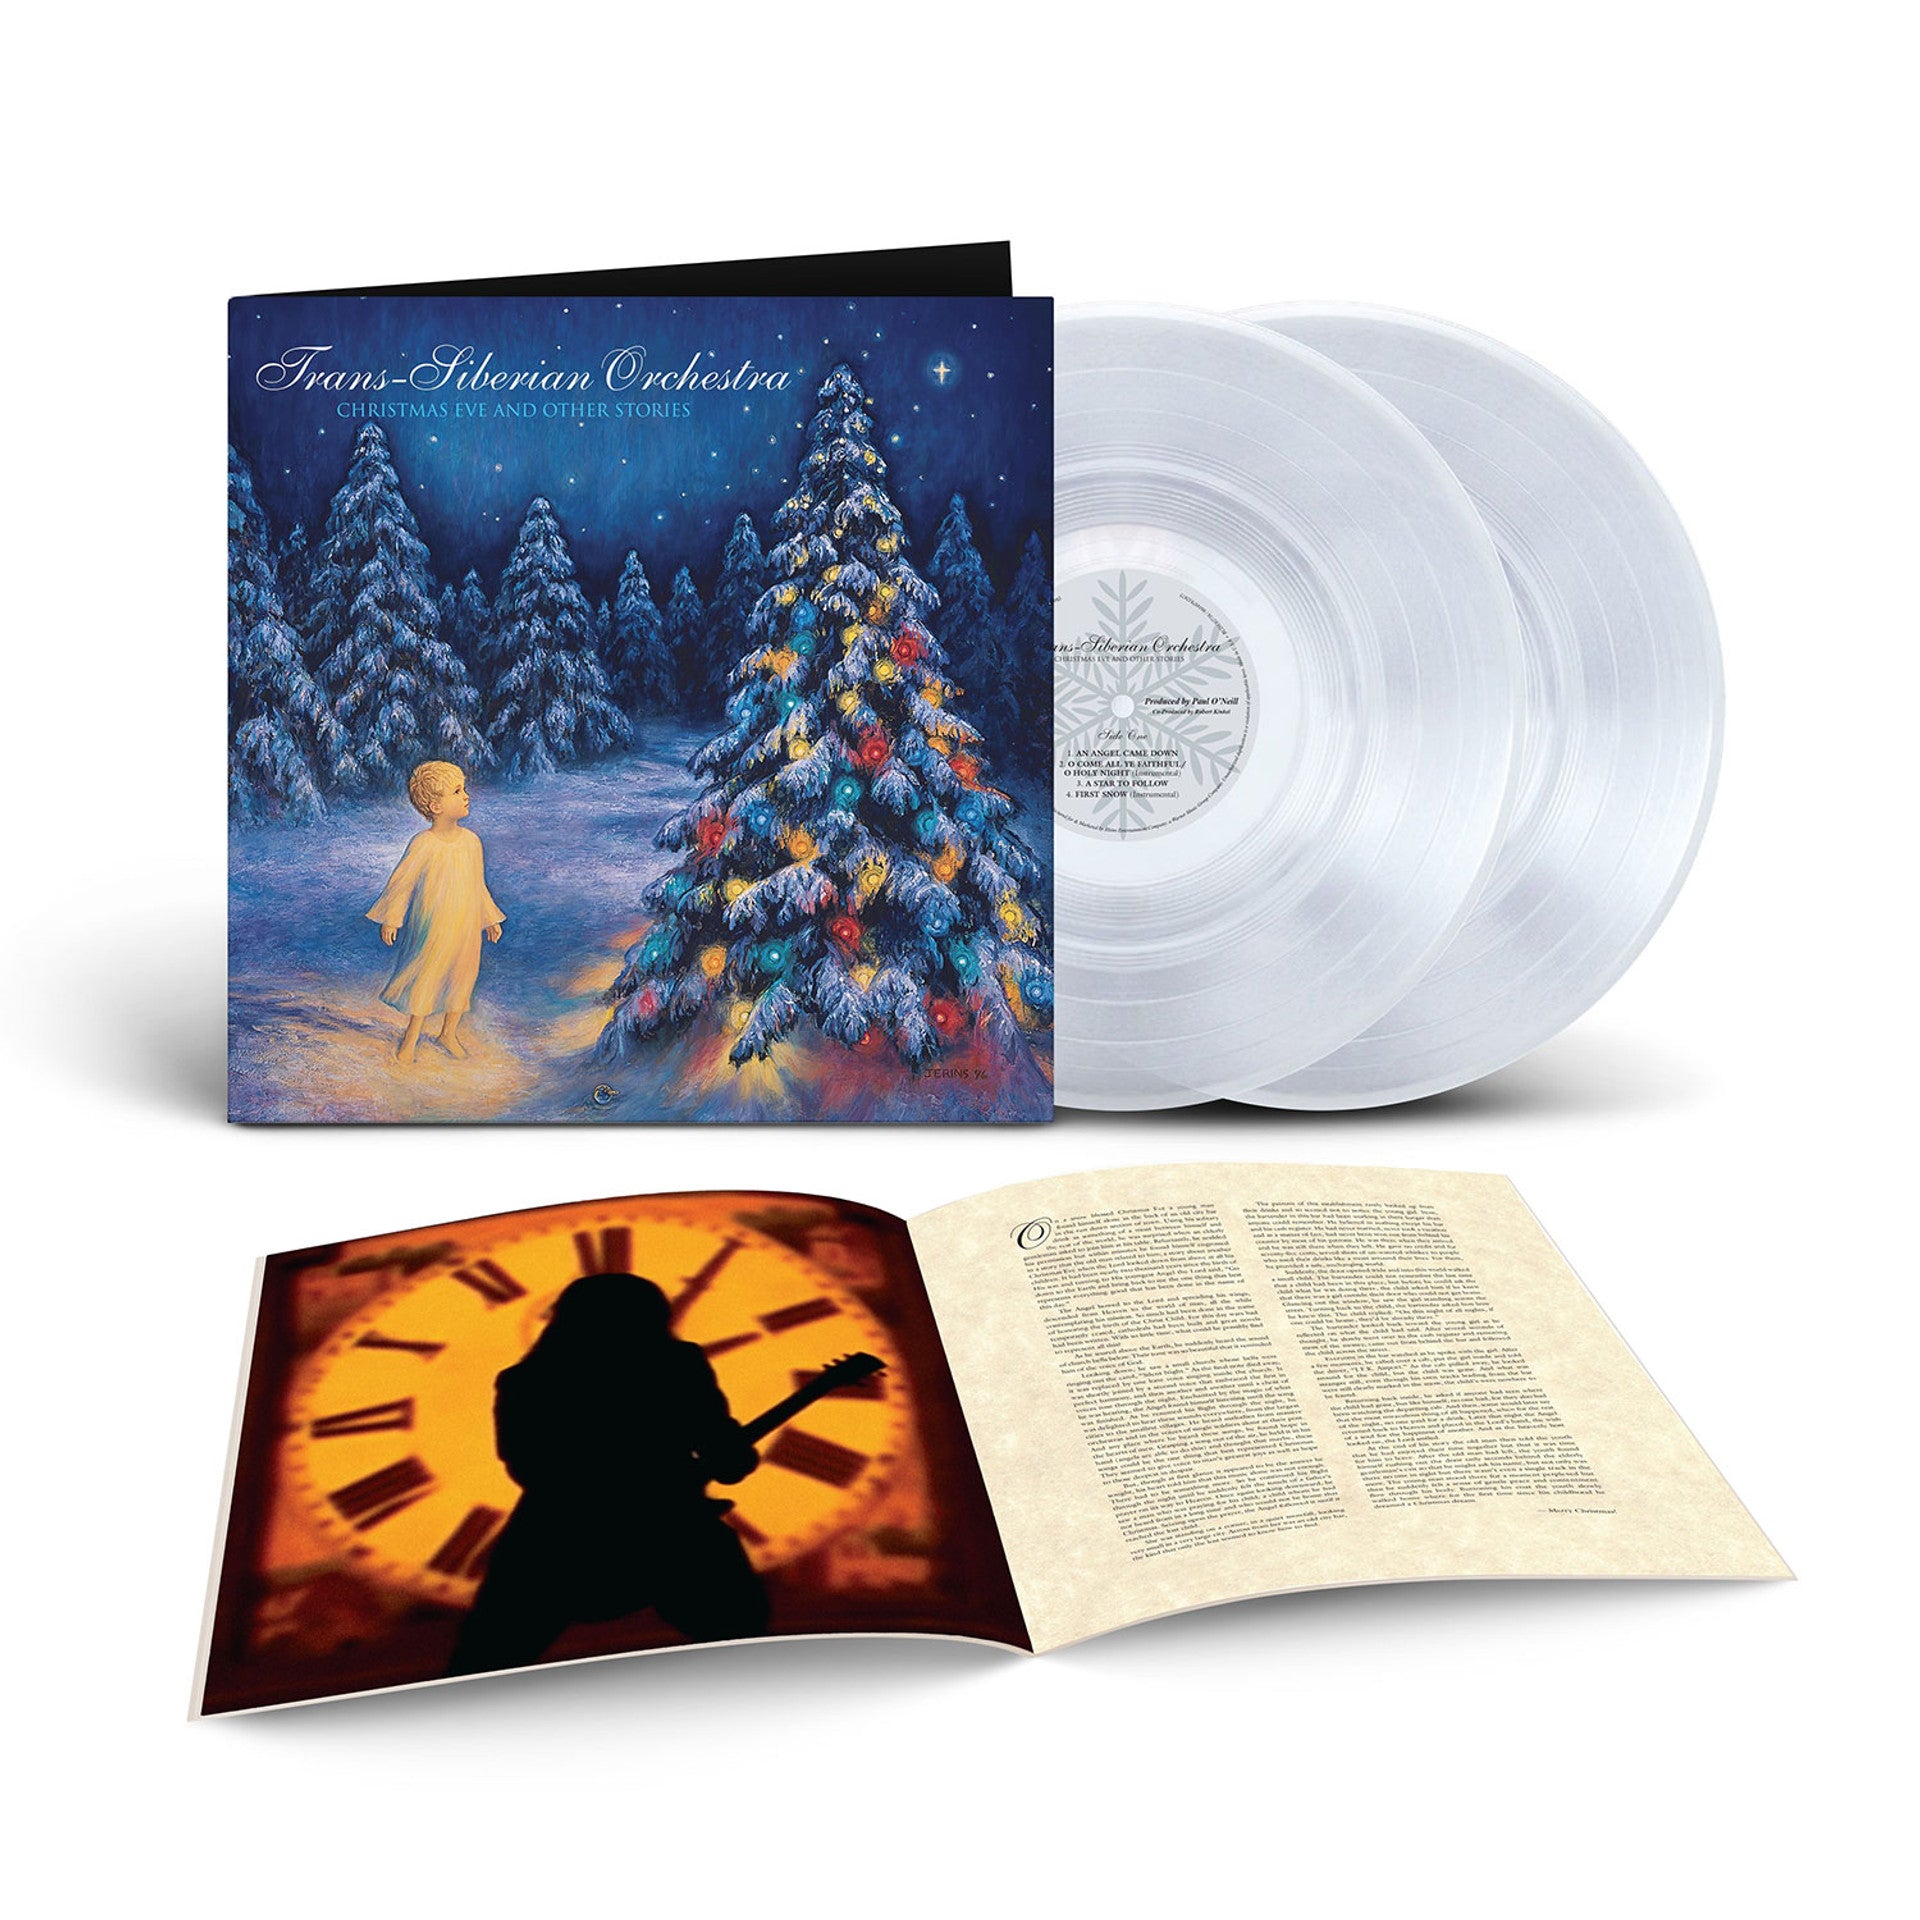 Trans-Siberian Orchestra - Christmas Eve And Other Stories [2LP] (Clear Vinyl) (limited)